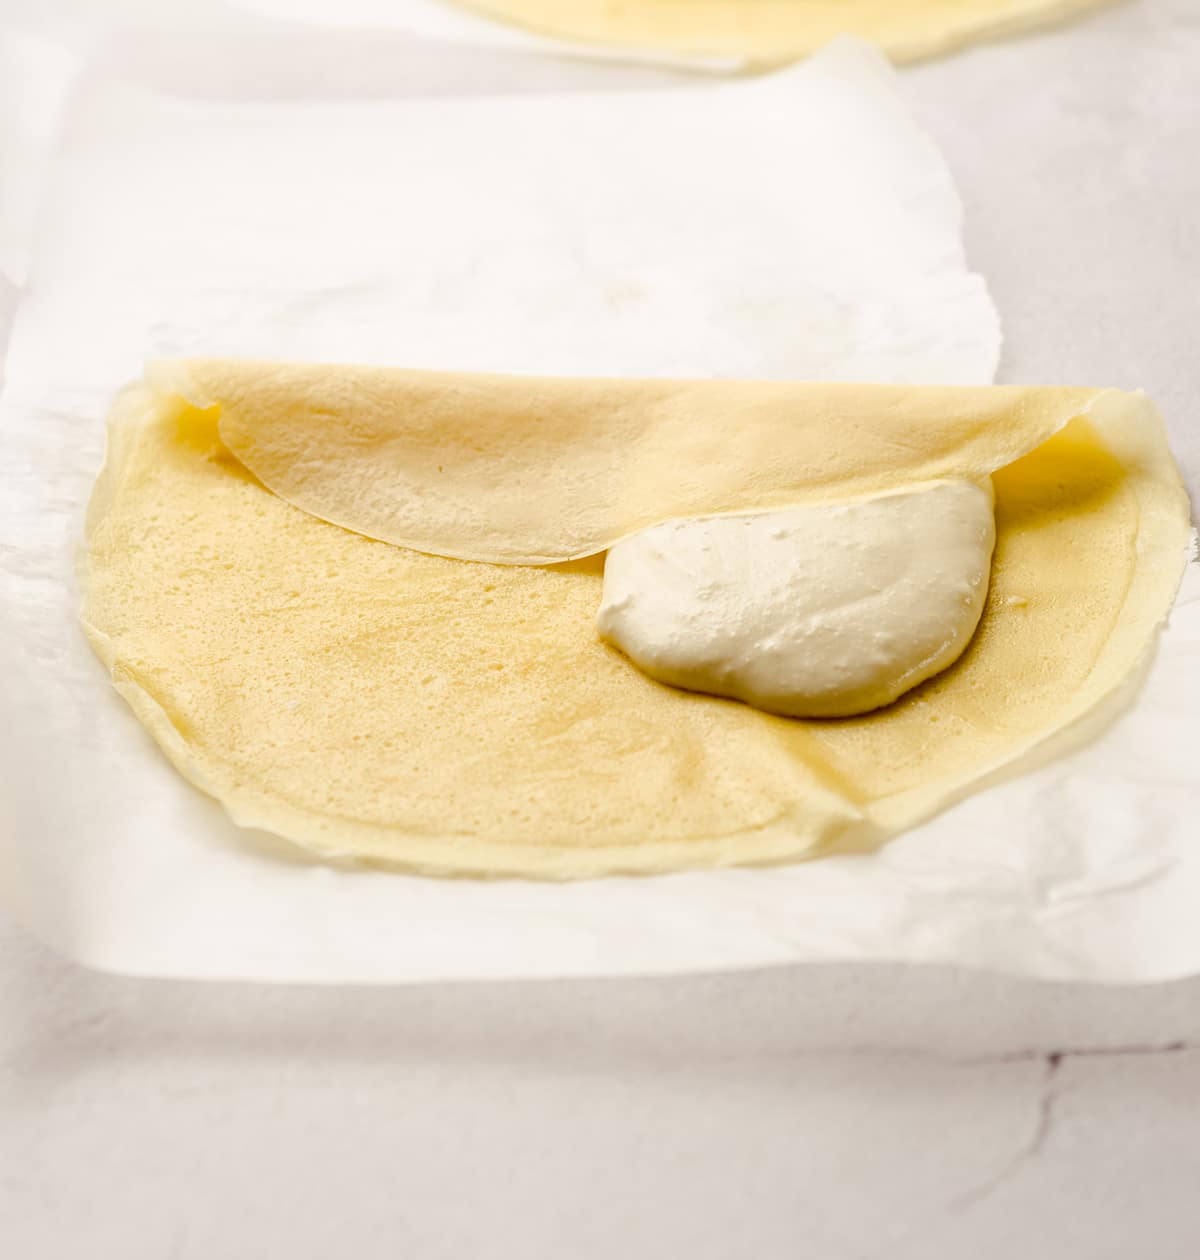 Folding the sides of the crepe over the cheese blintz filling.